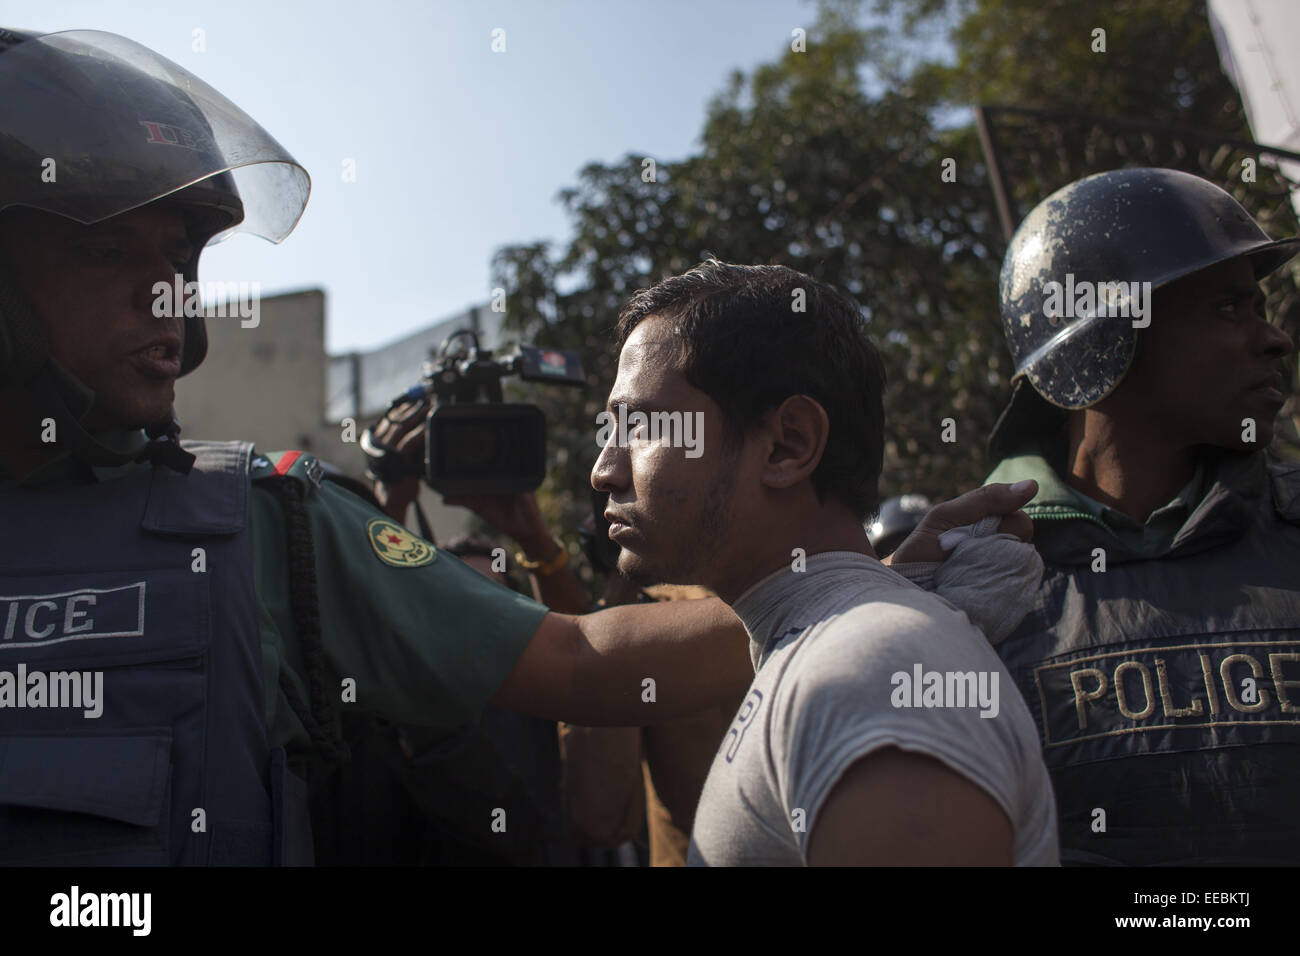 Jan. 15, 2015 - Dhaka, Bangladesh - Bangladeshi policemen detain an activist of an Islamic political group during a protest in front of Baitul mokarram mosque in Dhaka. The protest was against the Bangladeshi Prime Minister Sheikh Hasina and former Telecommunication Minister Abdul Latif Siddique after his alleged anti-Islam comments at a rally. (Credit Image: © Zakir Hossain Chowdhury/ZUMA Wire) Stock Photo